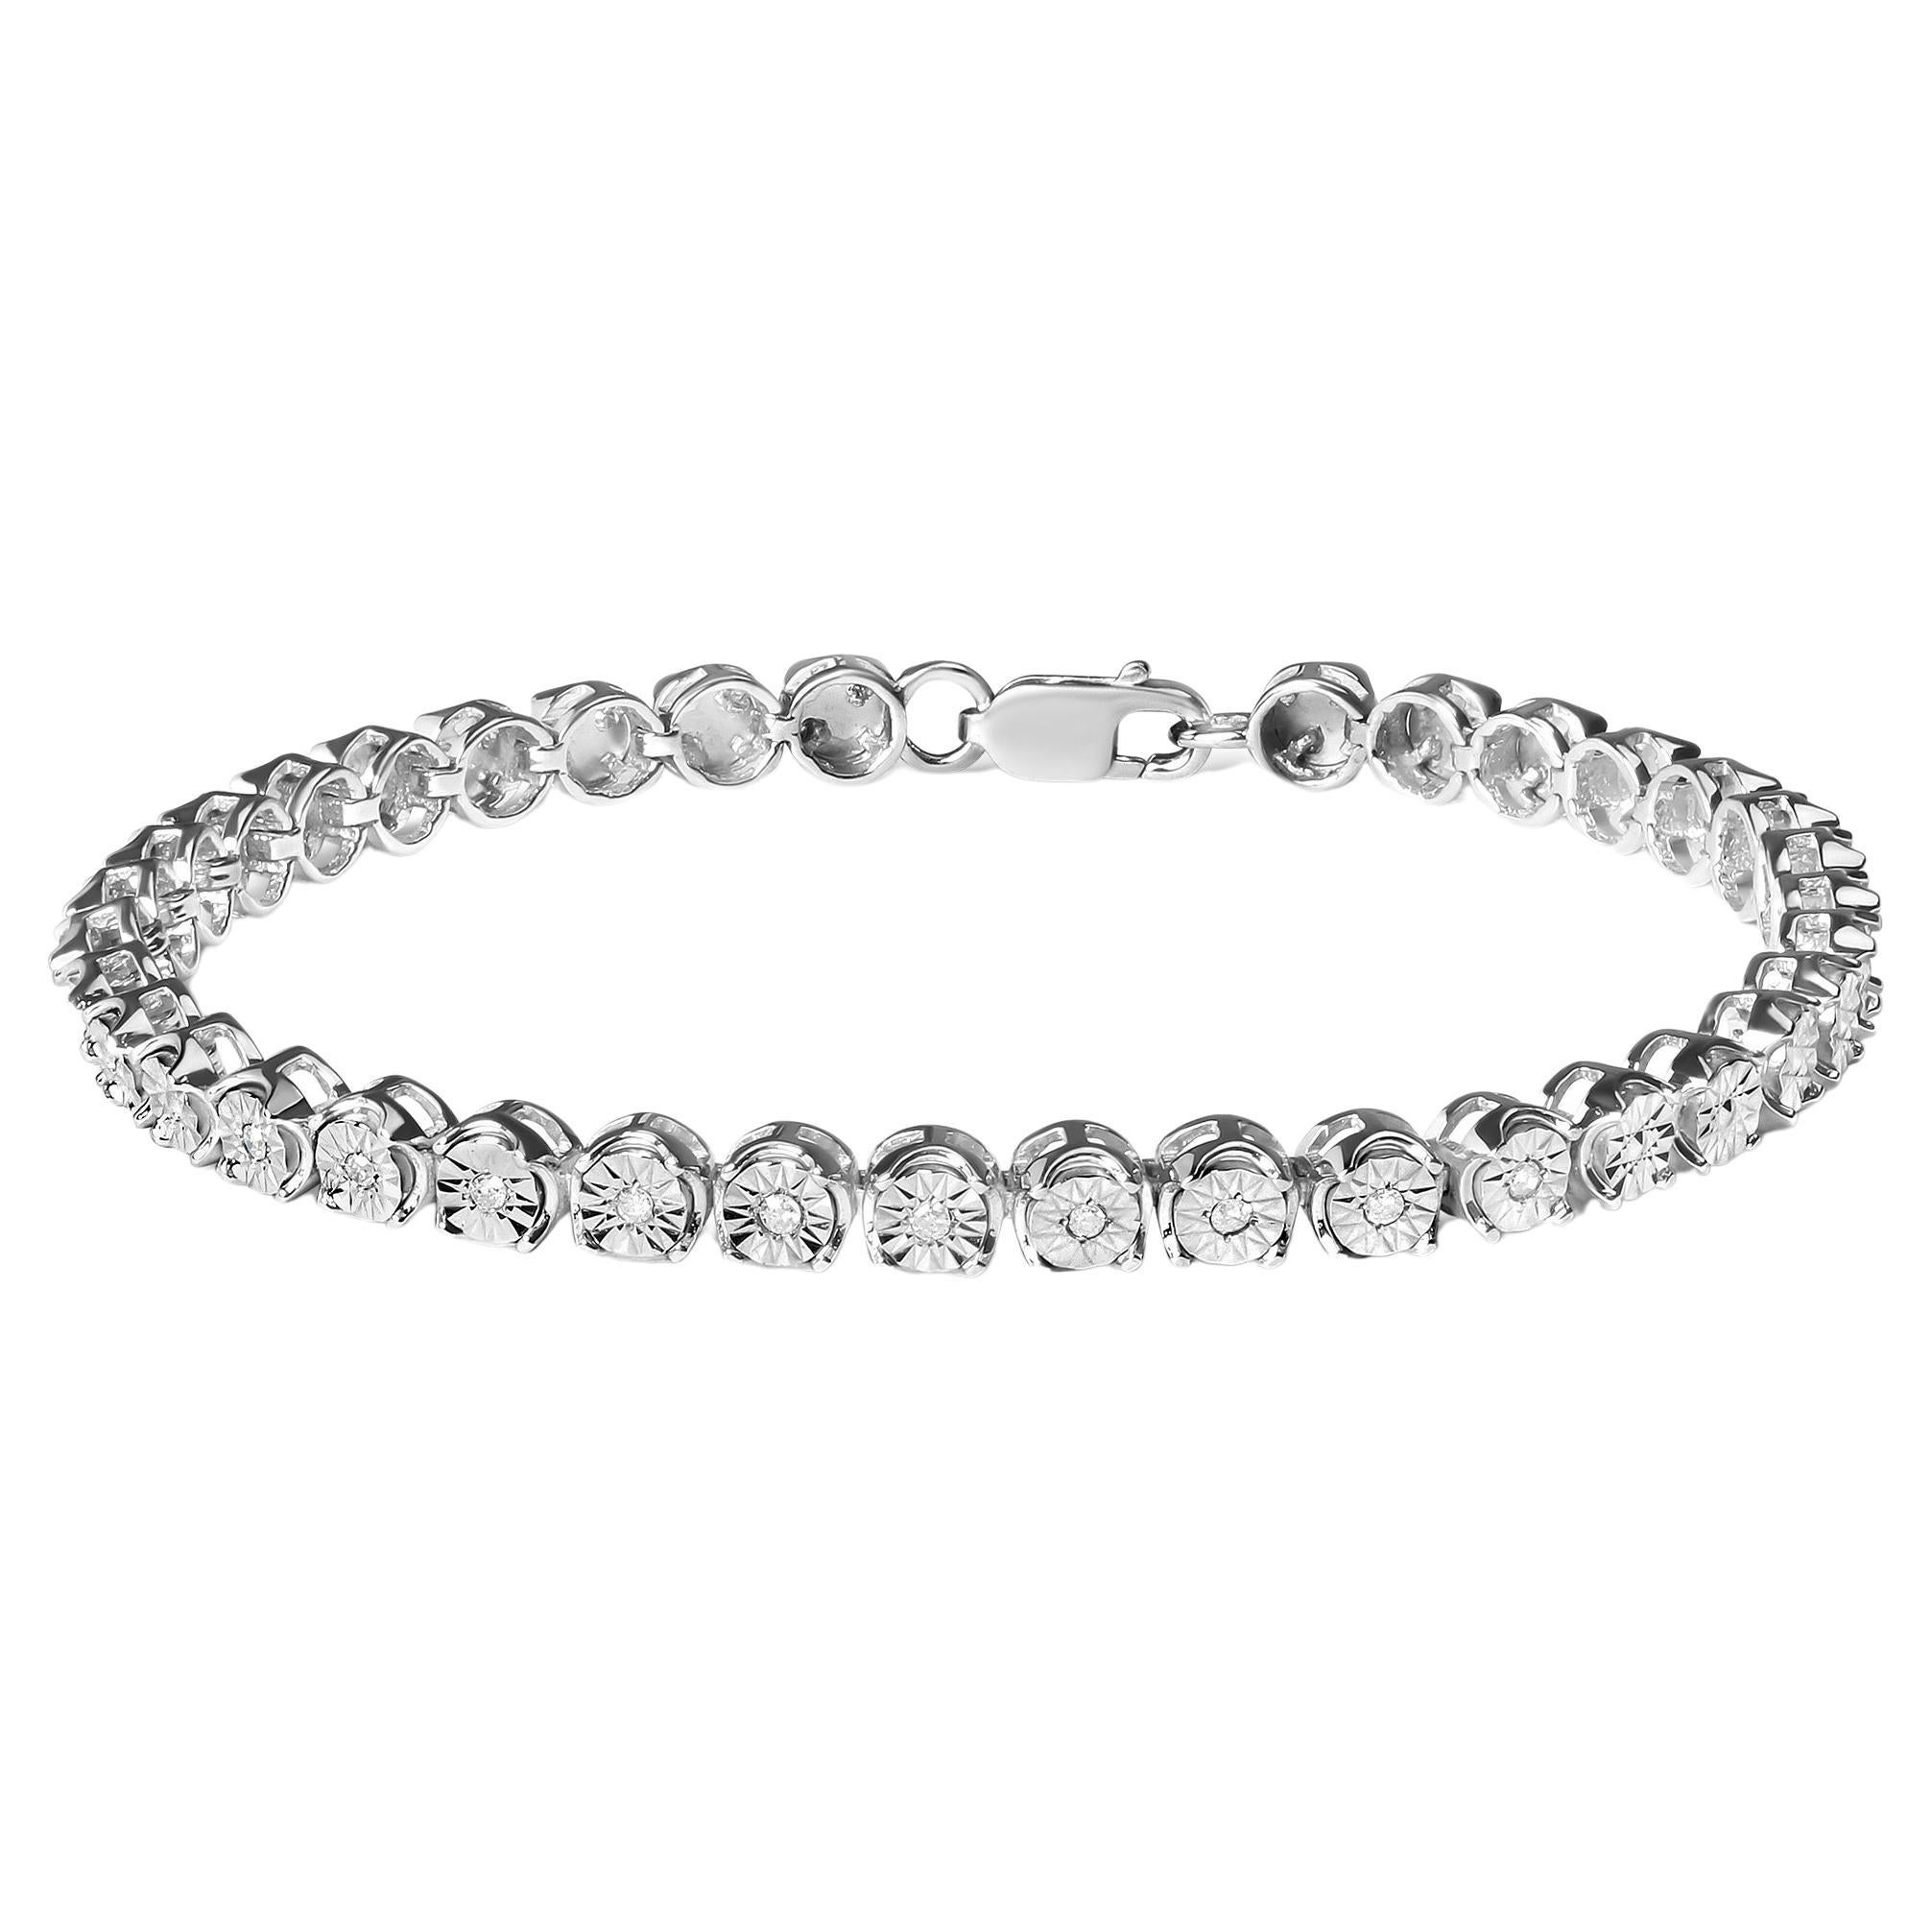 .925 Sterling Silver 1/10 Cttw Miracle Set Diamond and Bead Link Tennis Bracelet